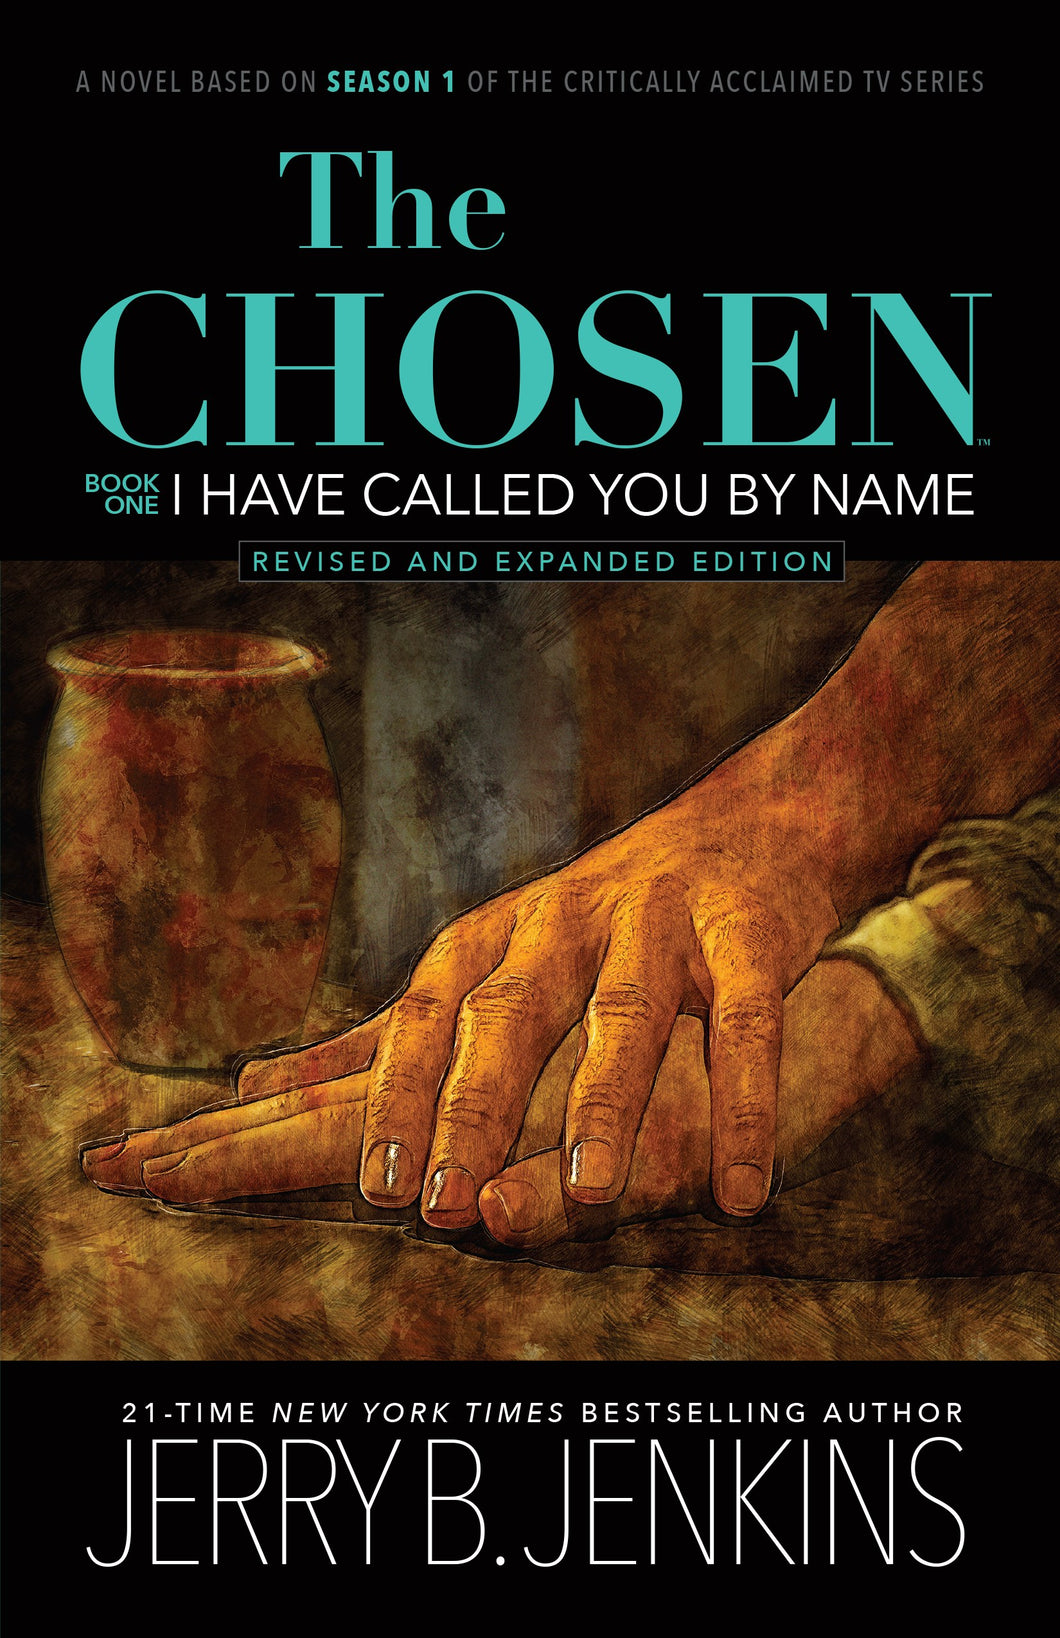 Book One: I Have Called You By Name (Revised & Expanded)-Softcover